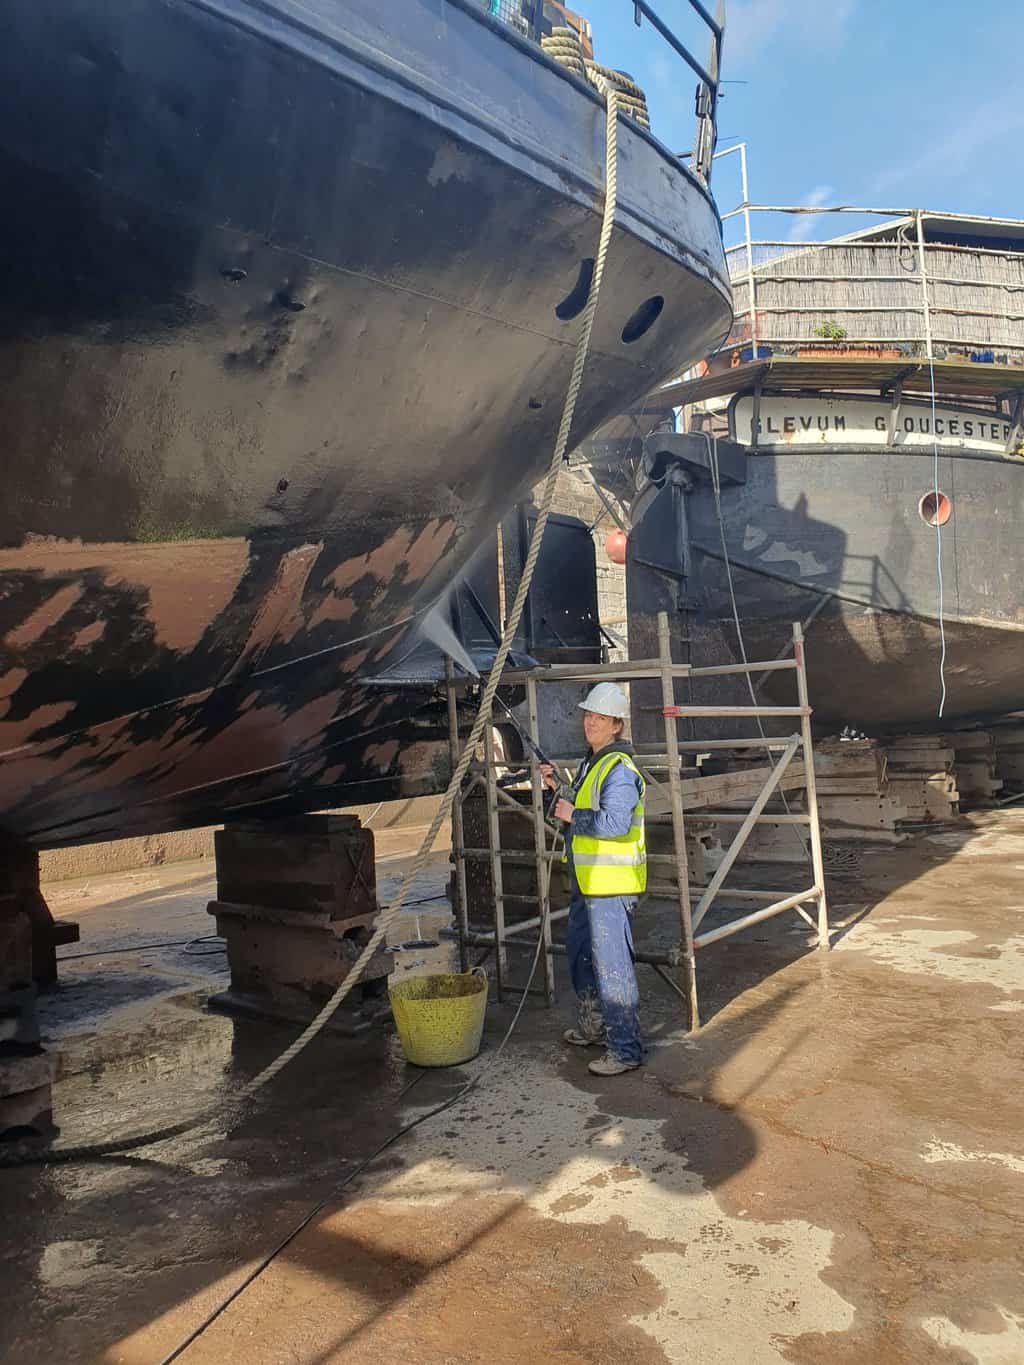 Patch Priming With Jotamastic 90 AL - Rust inhibiting marine quality primers. Anna co-owner of floating harbour studios getting stuck in.